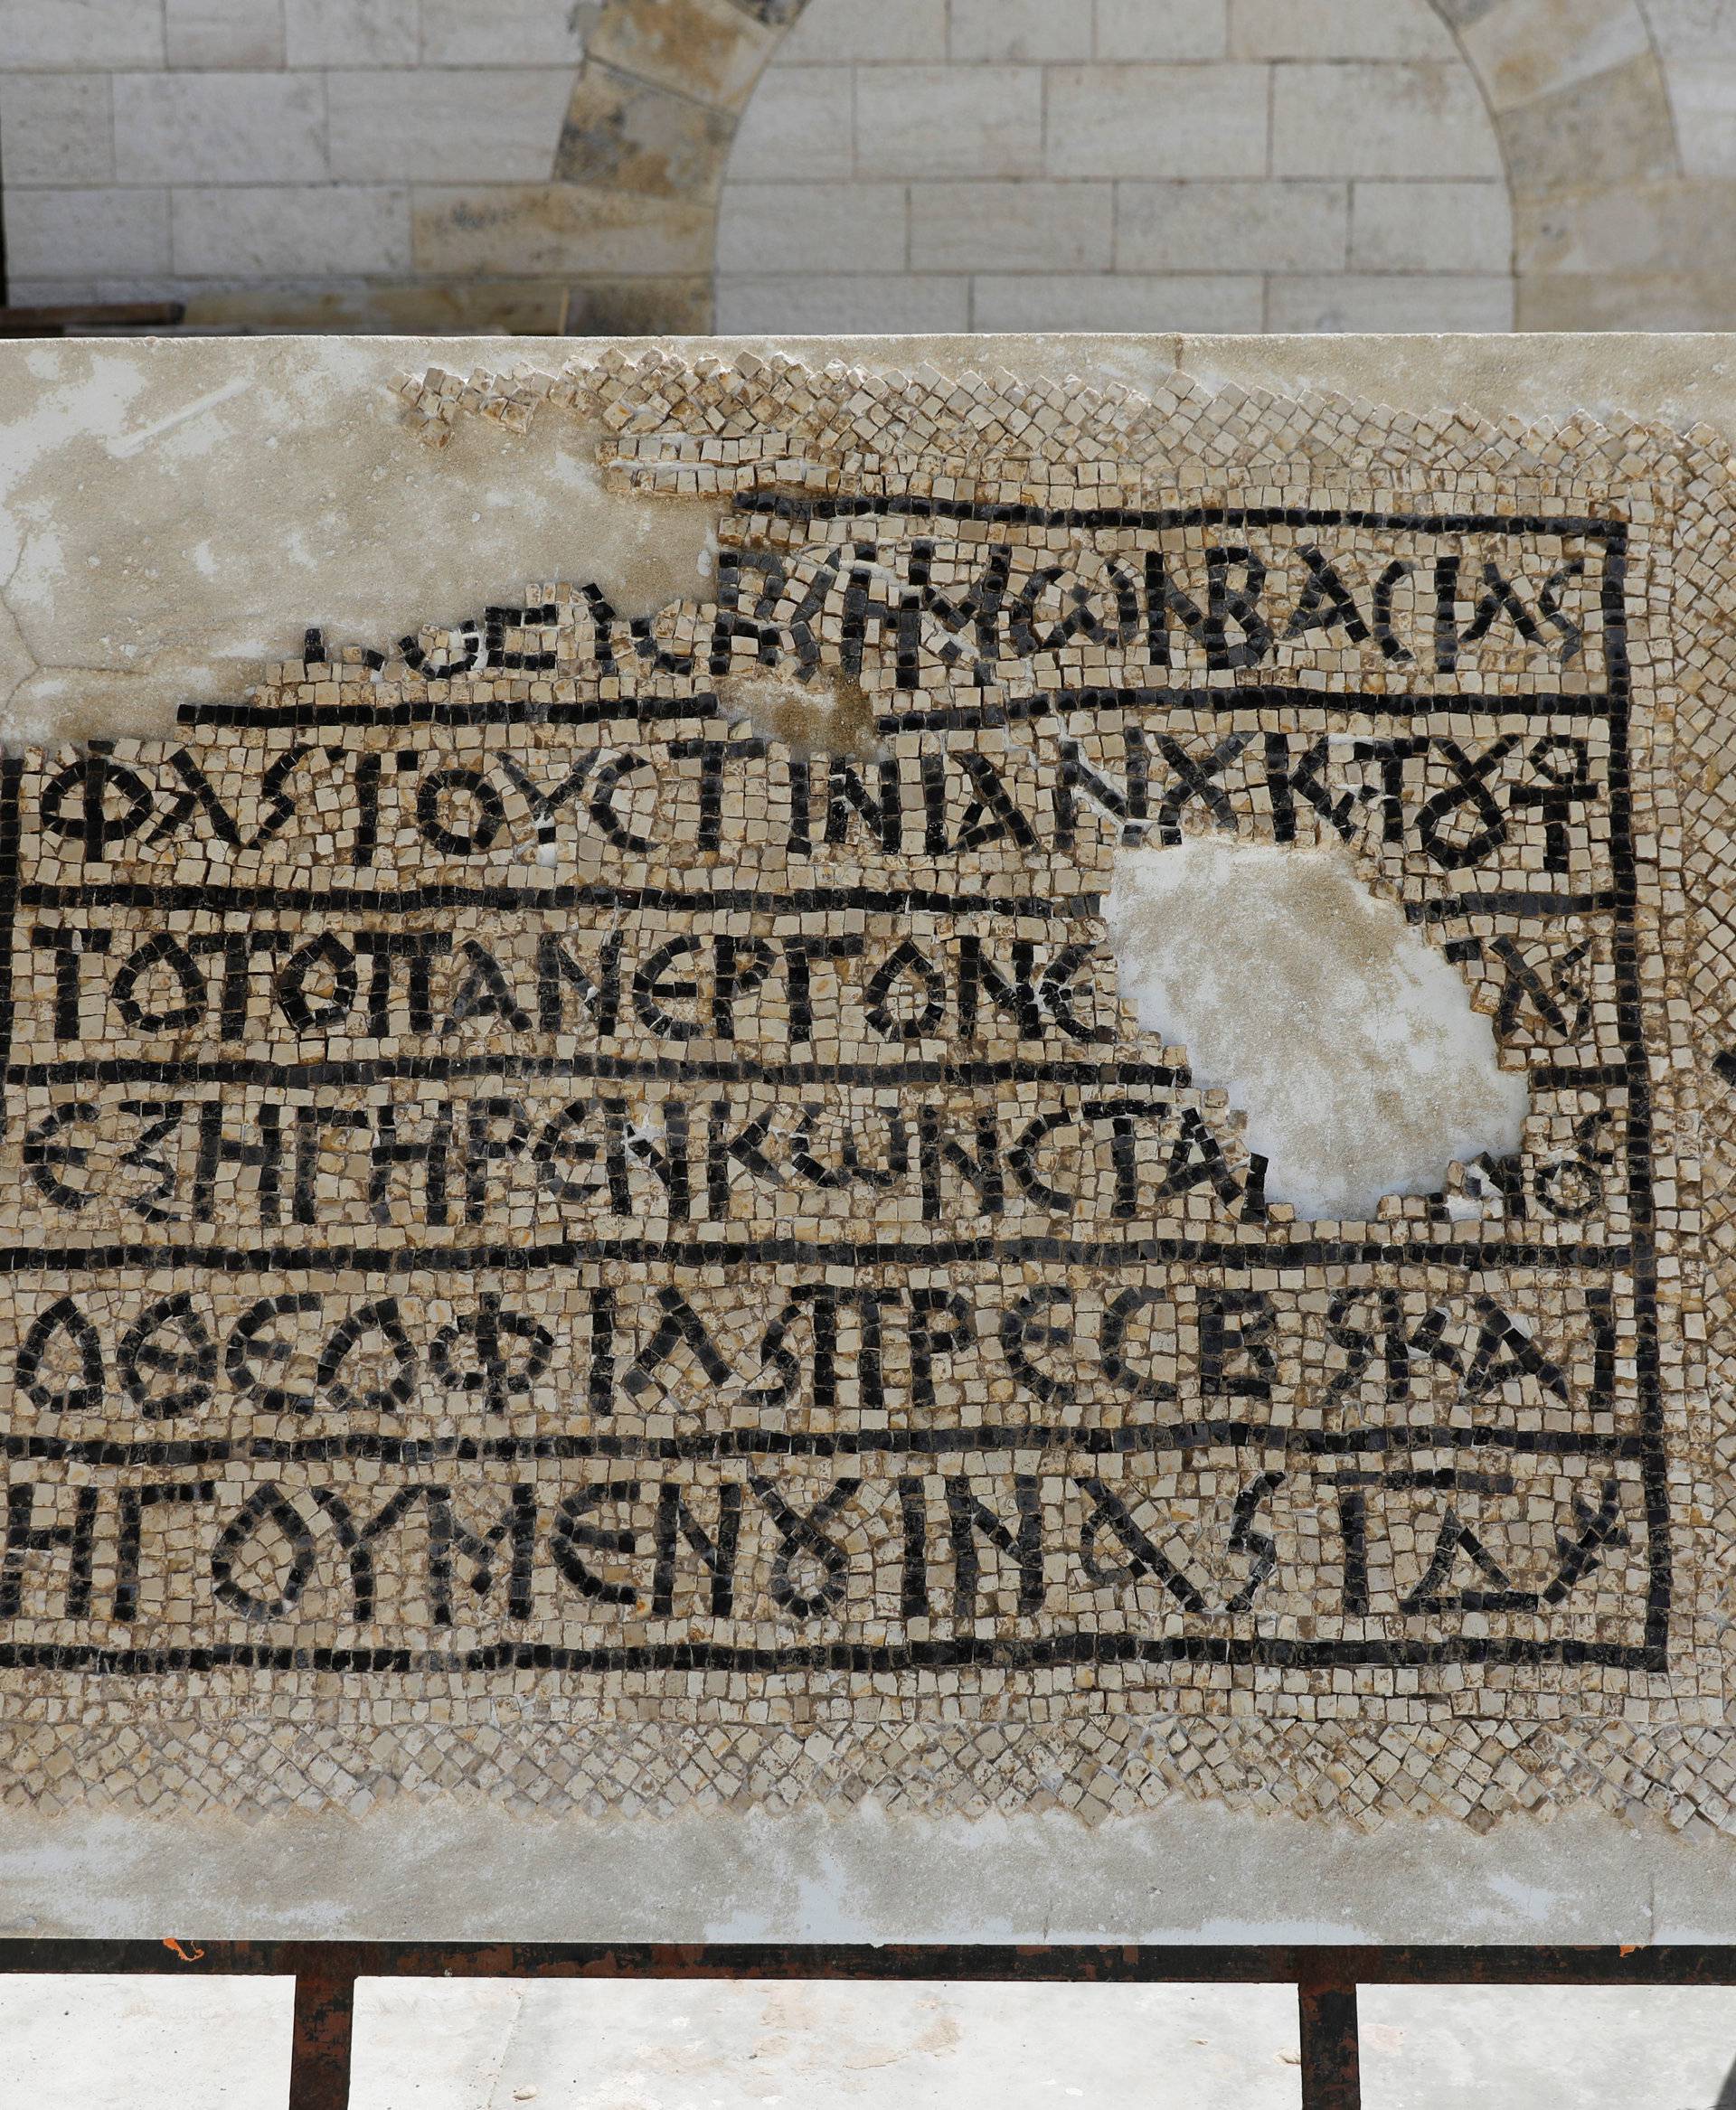 A 1500-year-old mosaic floor bearing a Greek writing, discovered near Damascus Gate in Jerusalem's Old City, is displayed at the Rockefeller Museum in Jerusalem